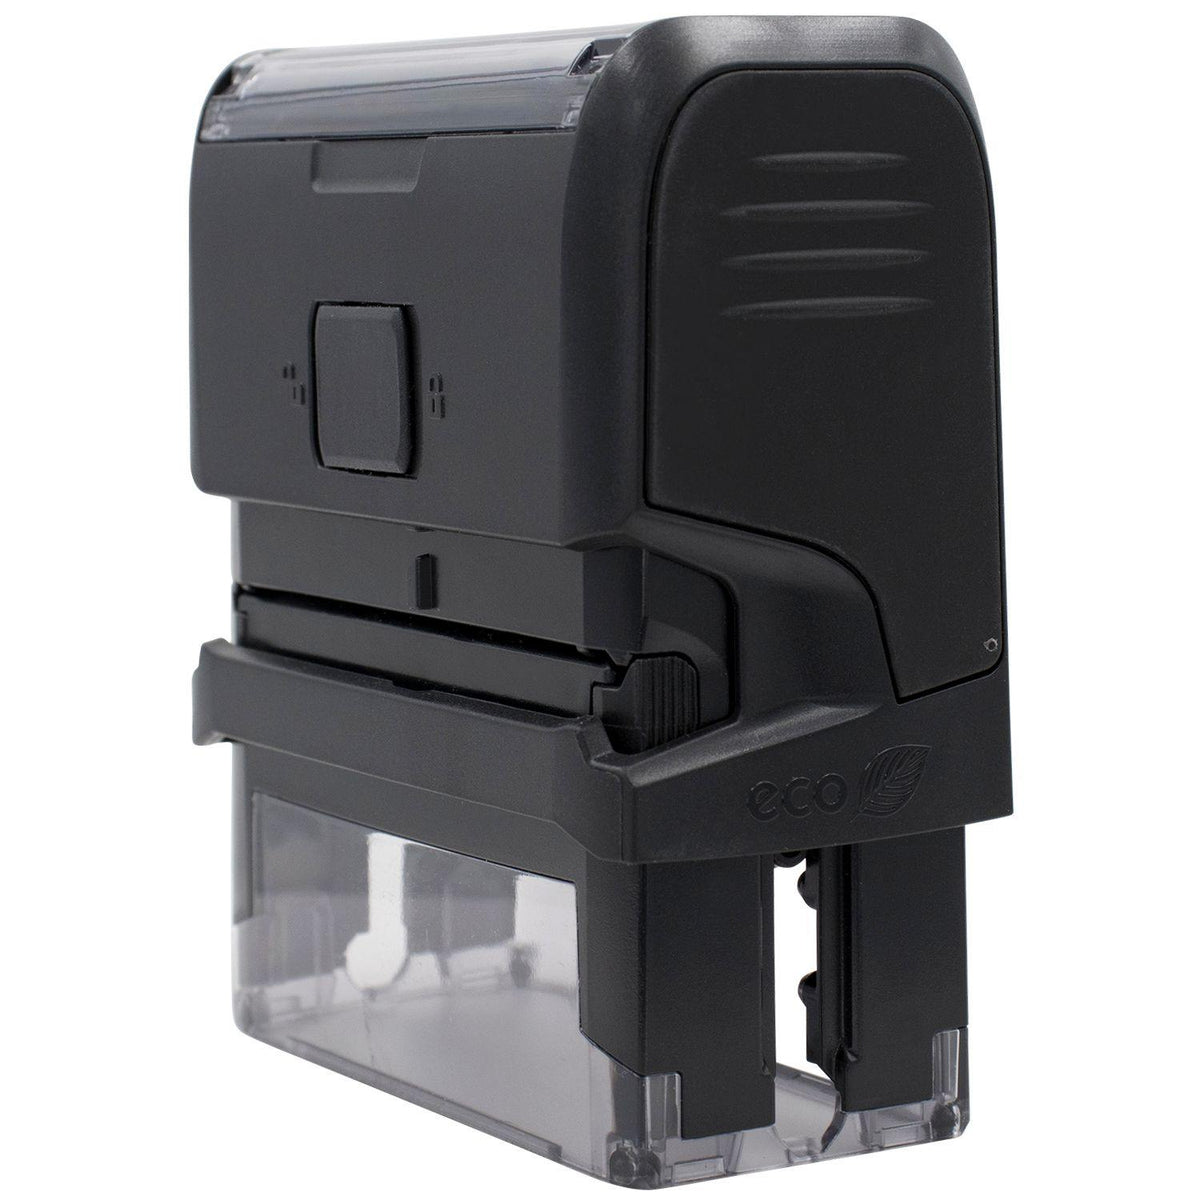 Large Self Inking Co Pay Stamp - Engineer Seal Stamps - Brand_Trodat, Impression Size_Large, Stamp Type_Self-Inking Stamp, Type of Use_Medical Office